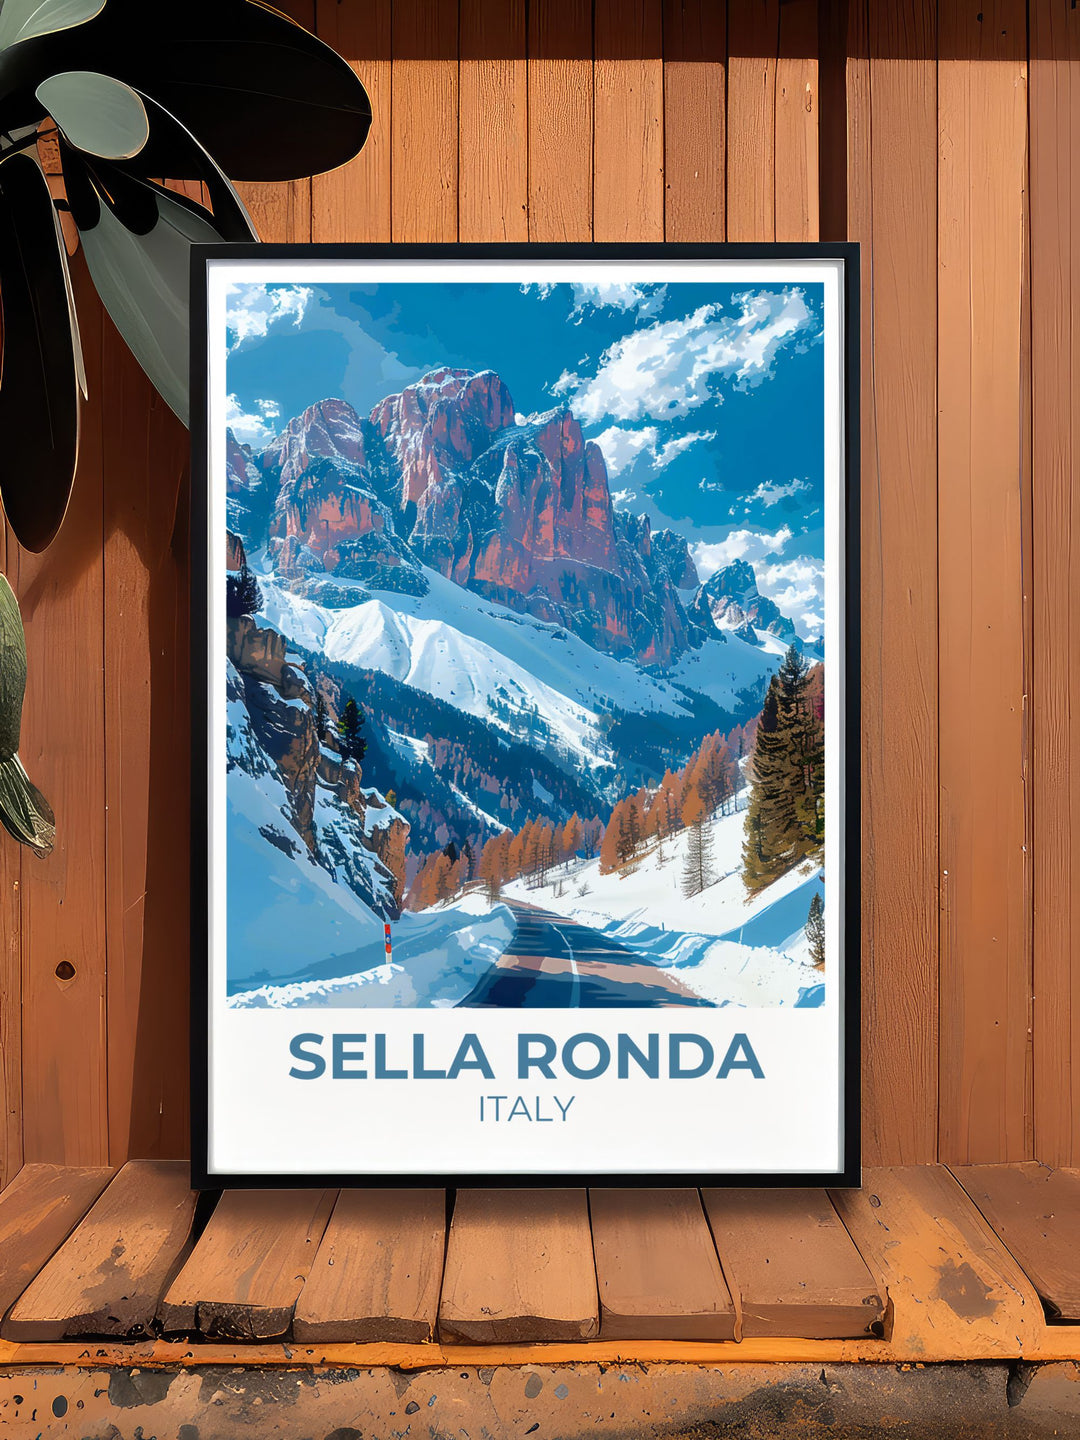 Elegant Sella Ronda Ski Circuit Framed Art featuring the Dolomites, bringing the thrill and beauty of the Italian Alps into your living space.